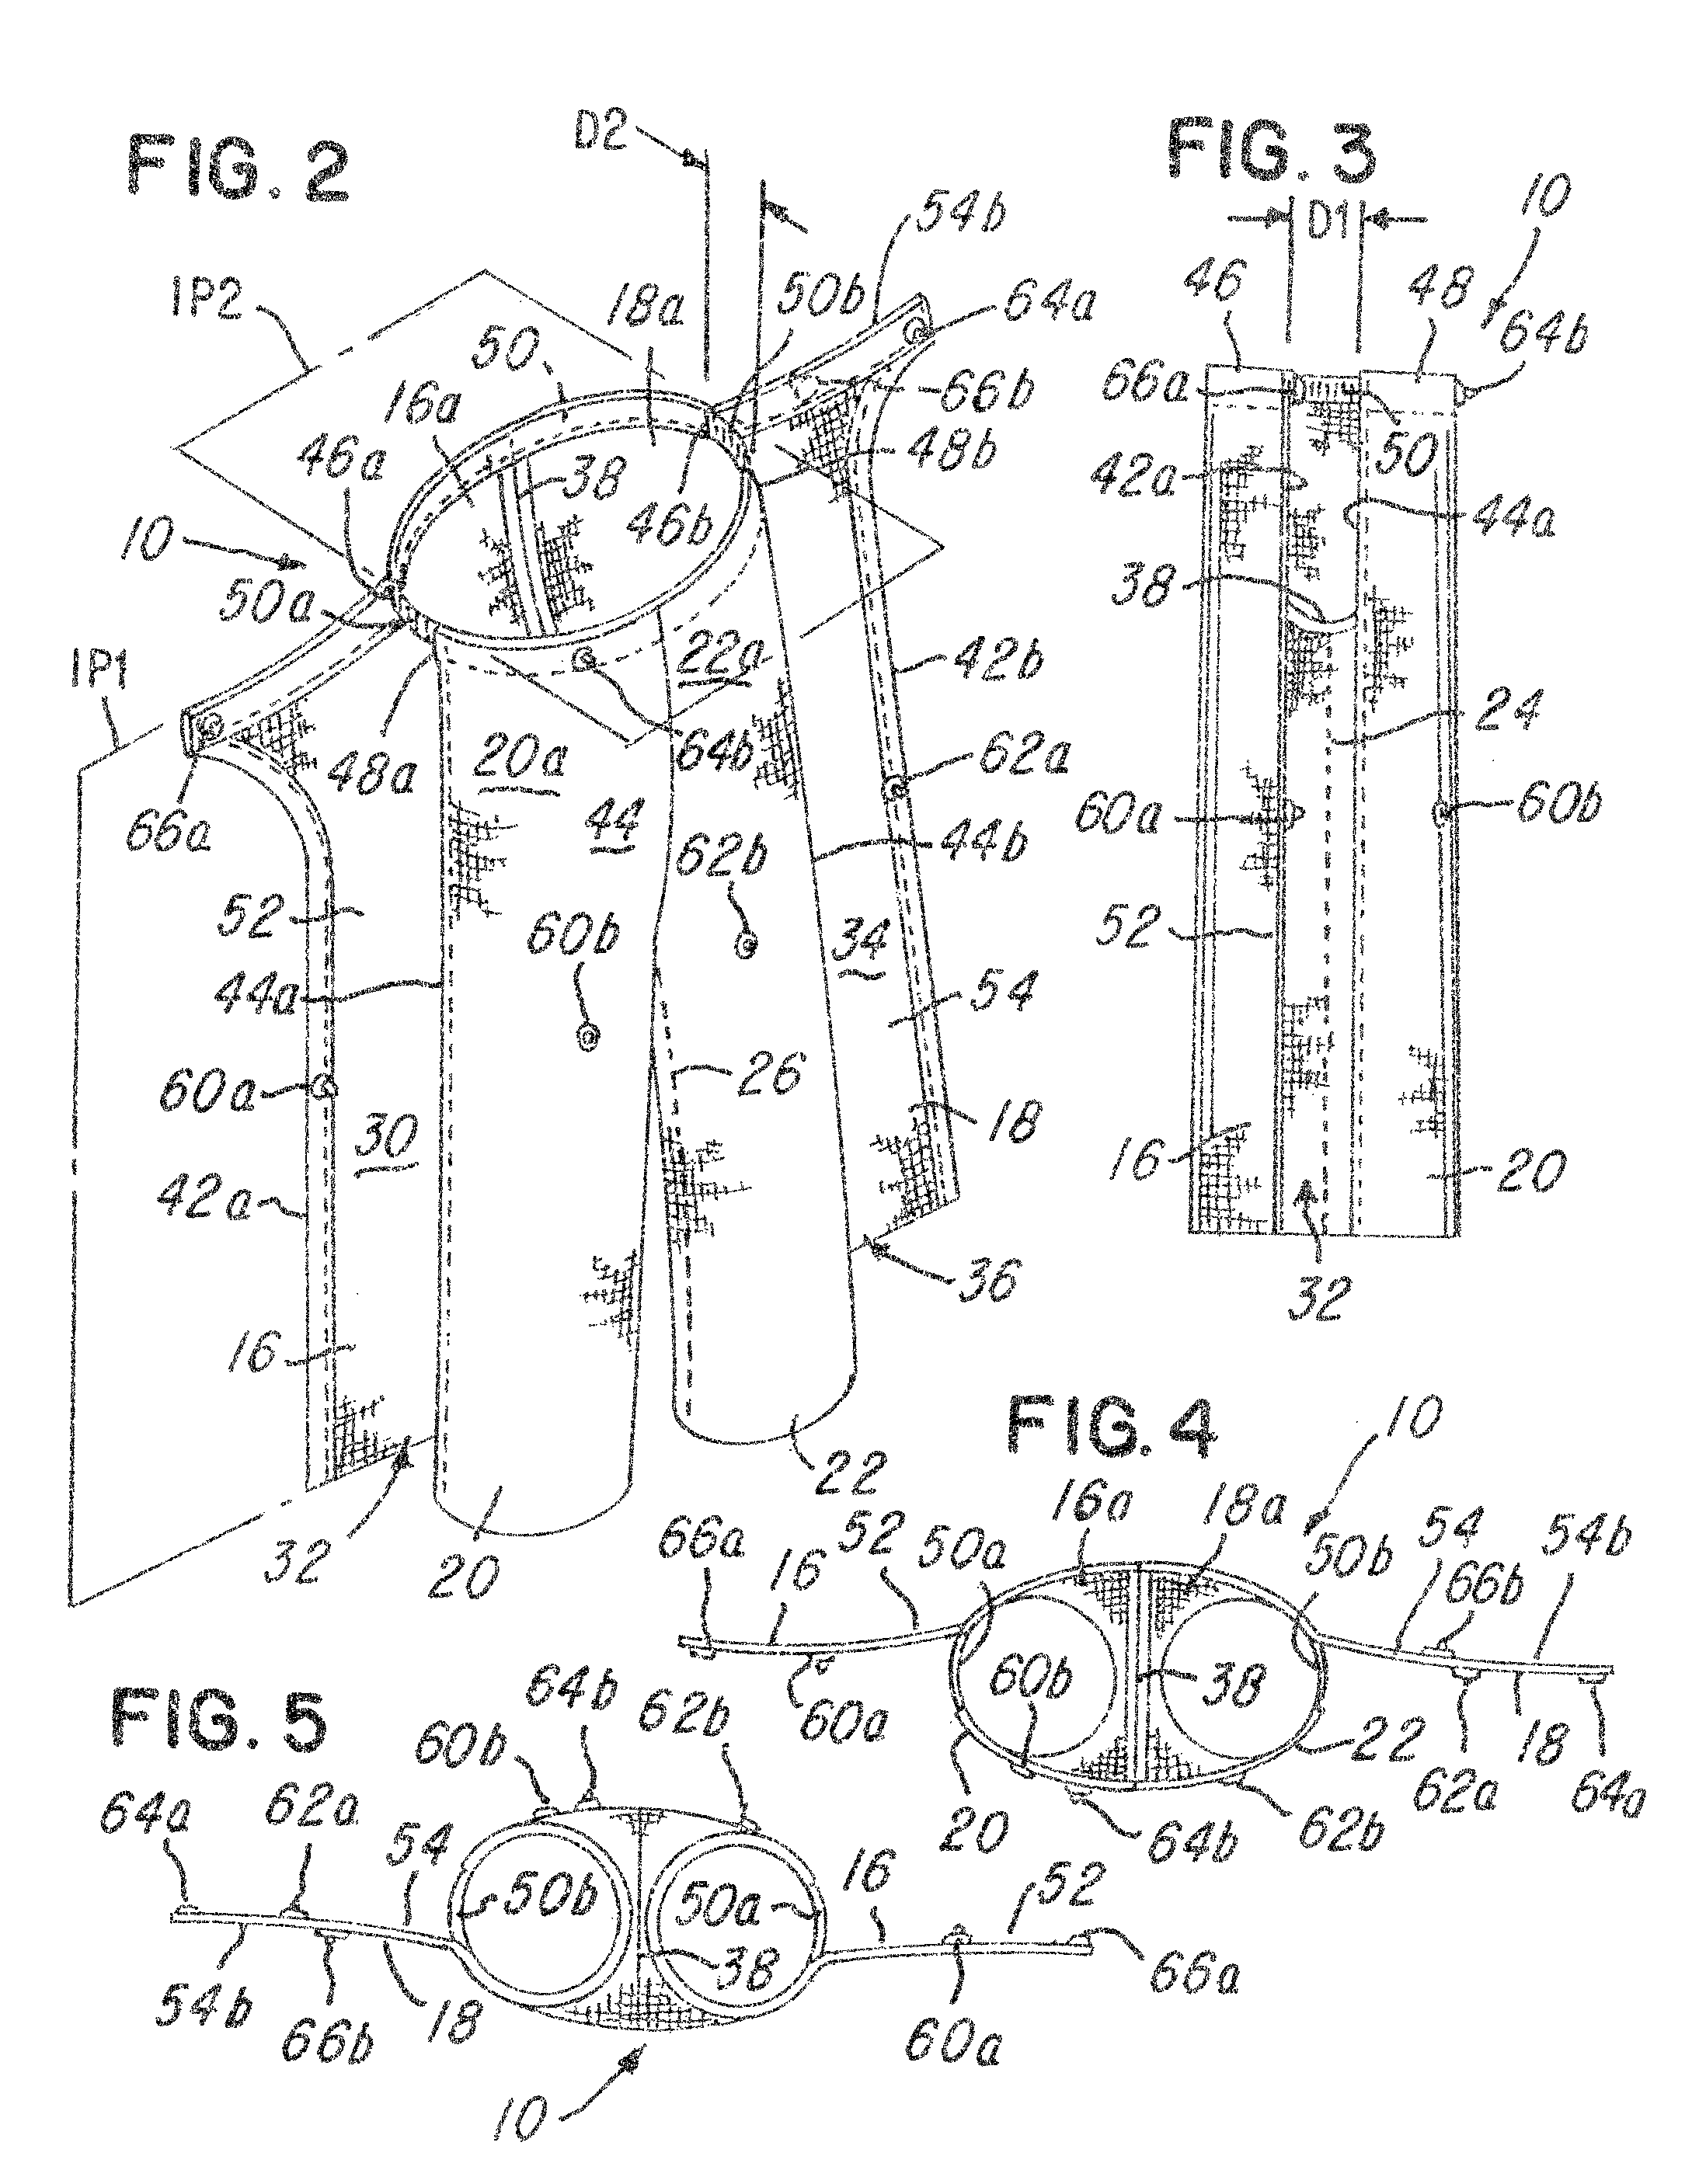 Pair of pants and method for donning and removing a pair of pants